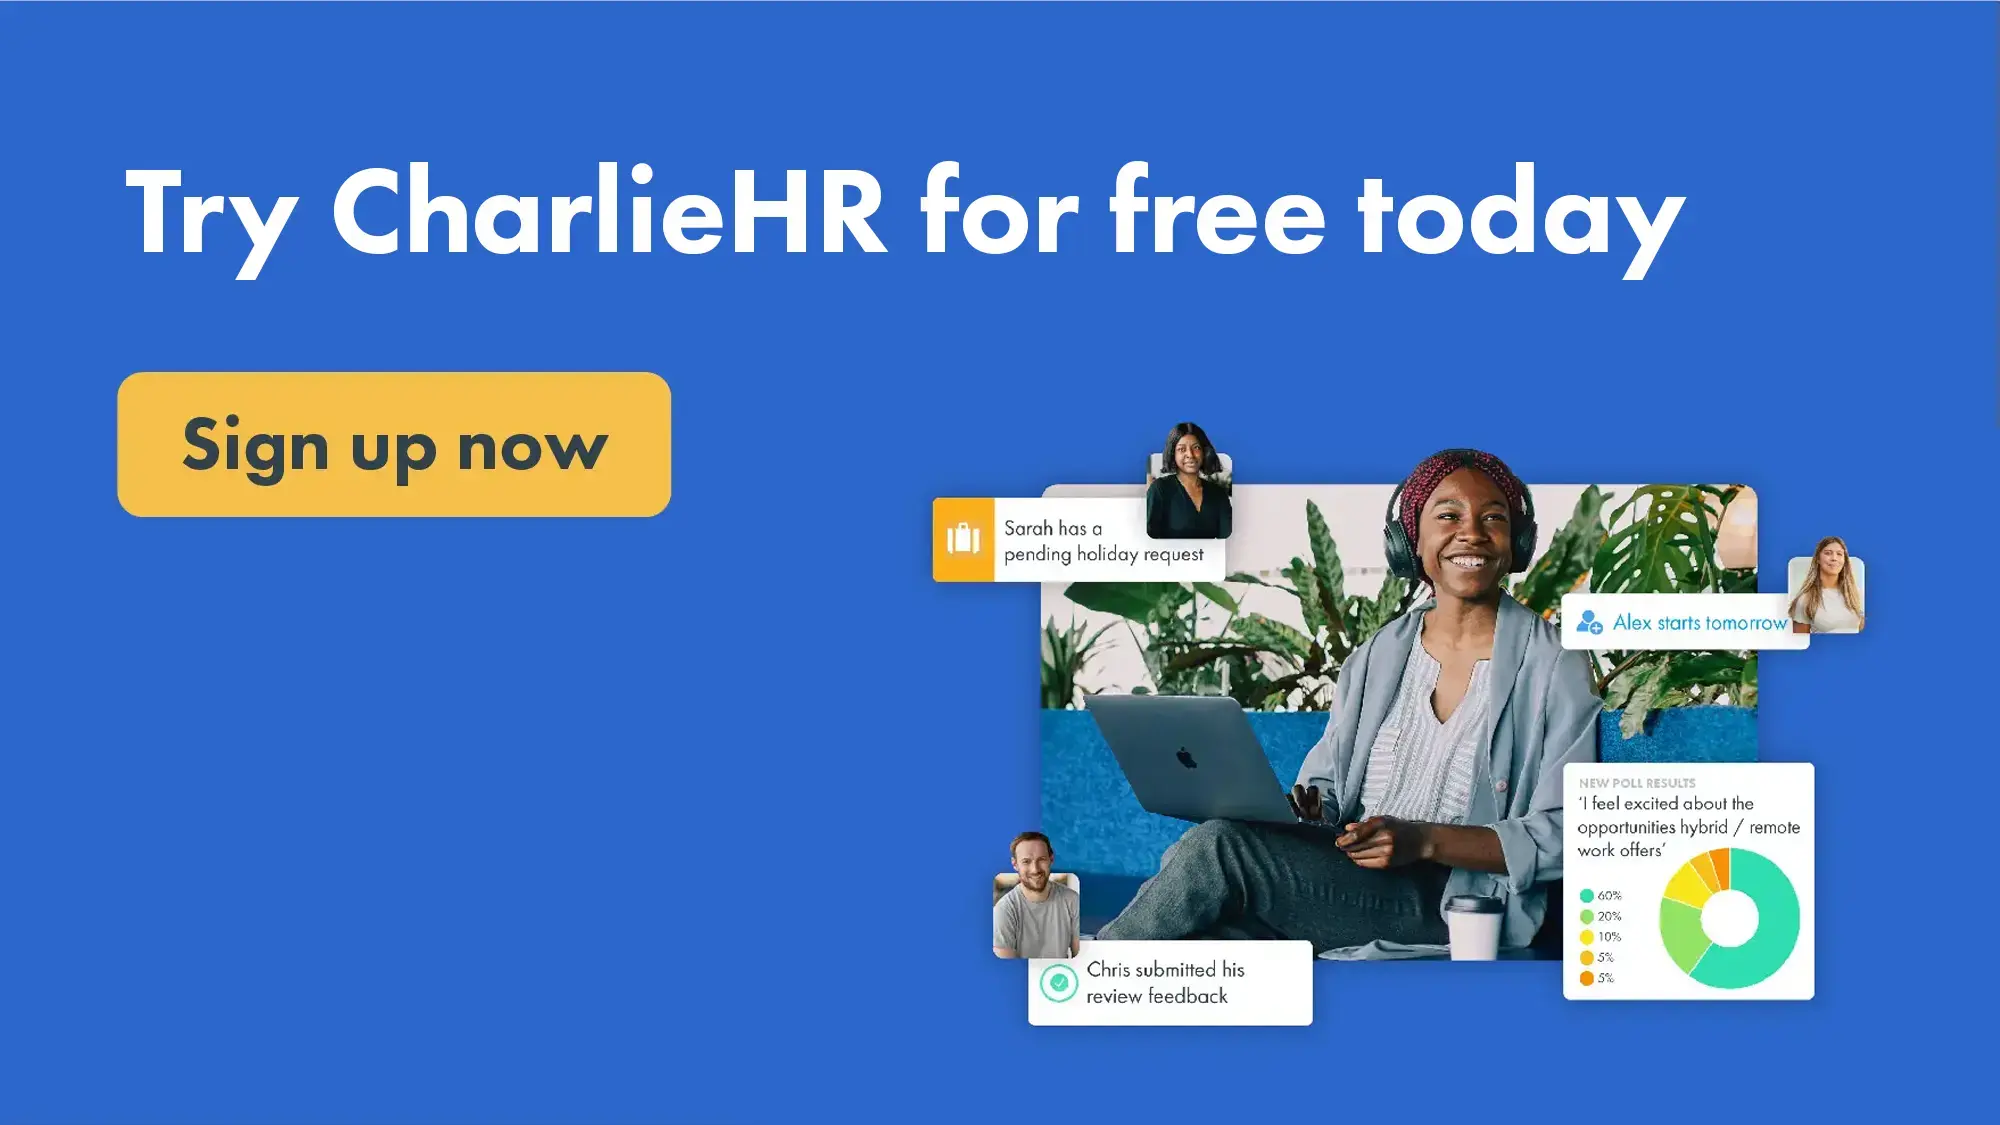 Click here to start a free trial of CharlieHR